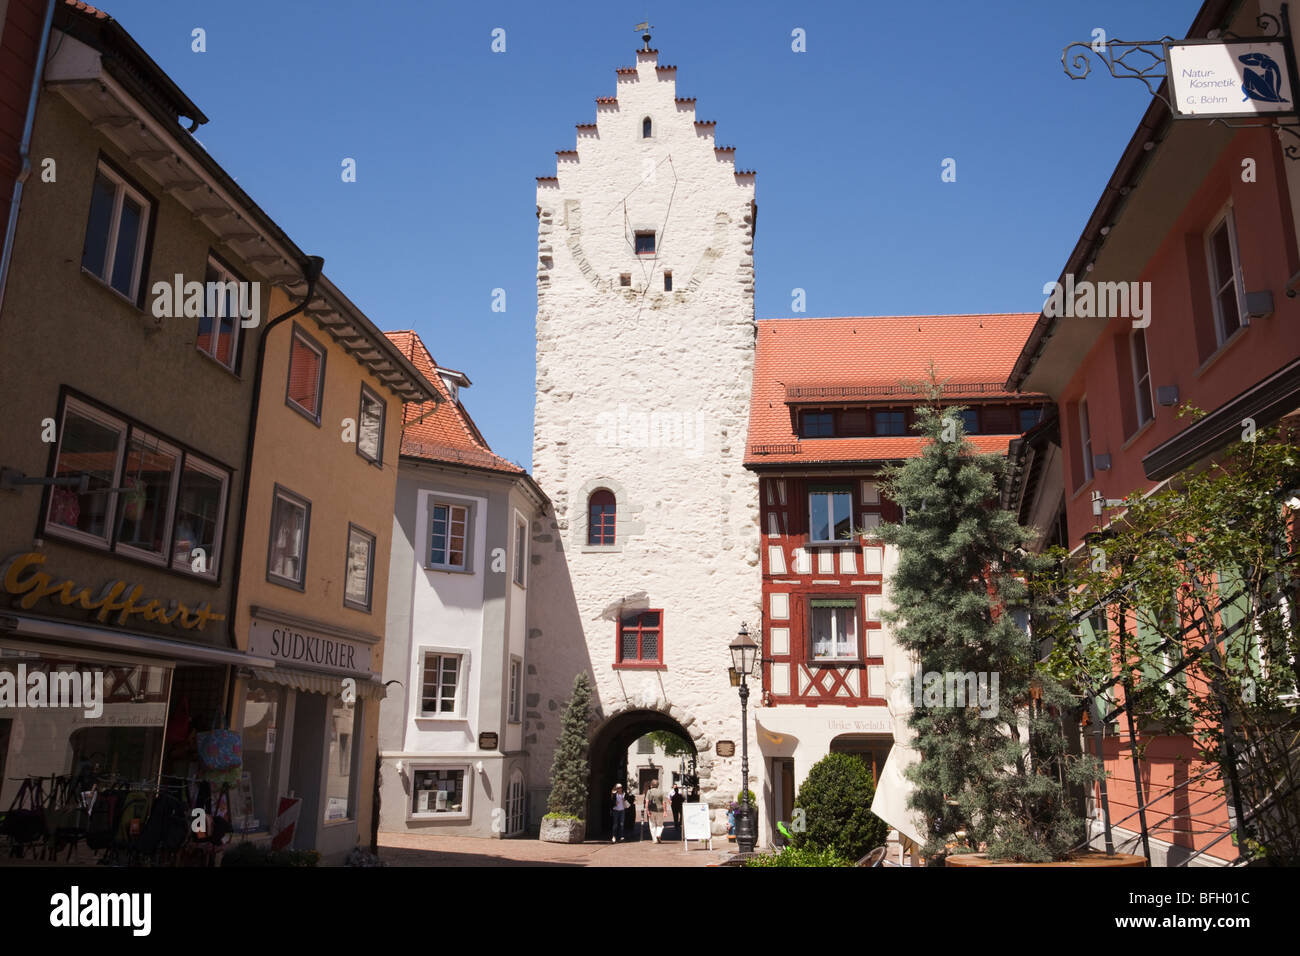 Marktstrasse, Markdorf, Baden-Wurttemberg, Germany. Old gateway and large sundial on cobbled street within Altstadt town walls Stock Photo